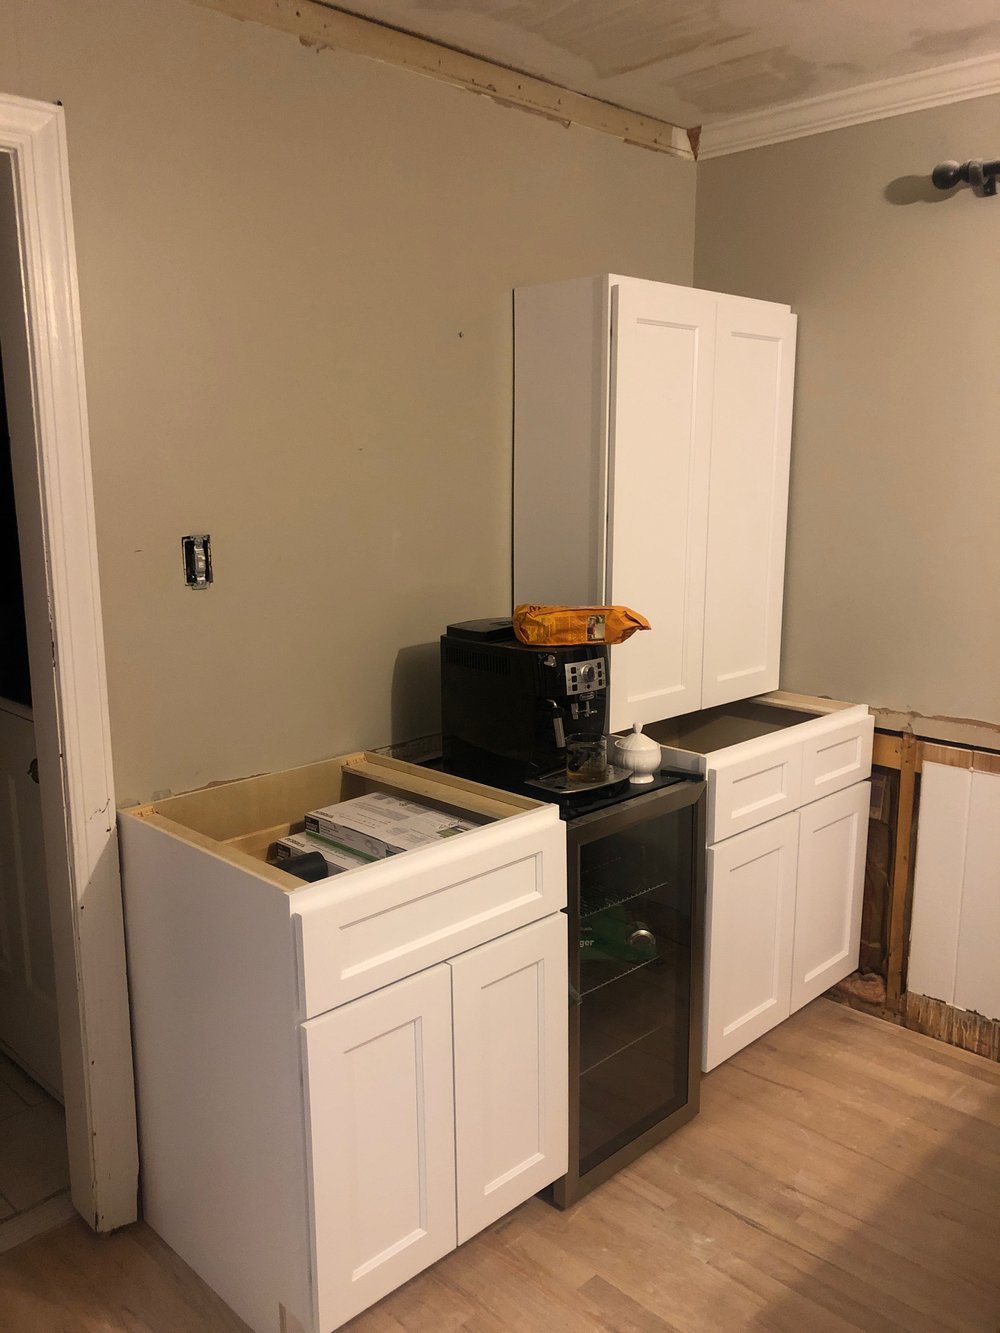 Who doesn’t want more cabinet space?! We had a blank wall in the eat-in kitchen area, so we decided to make it the wet bar. Obviously, we didn’t wait to plug the coffee maker back in!